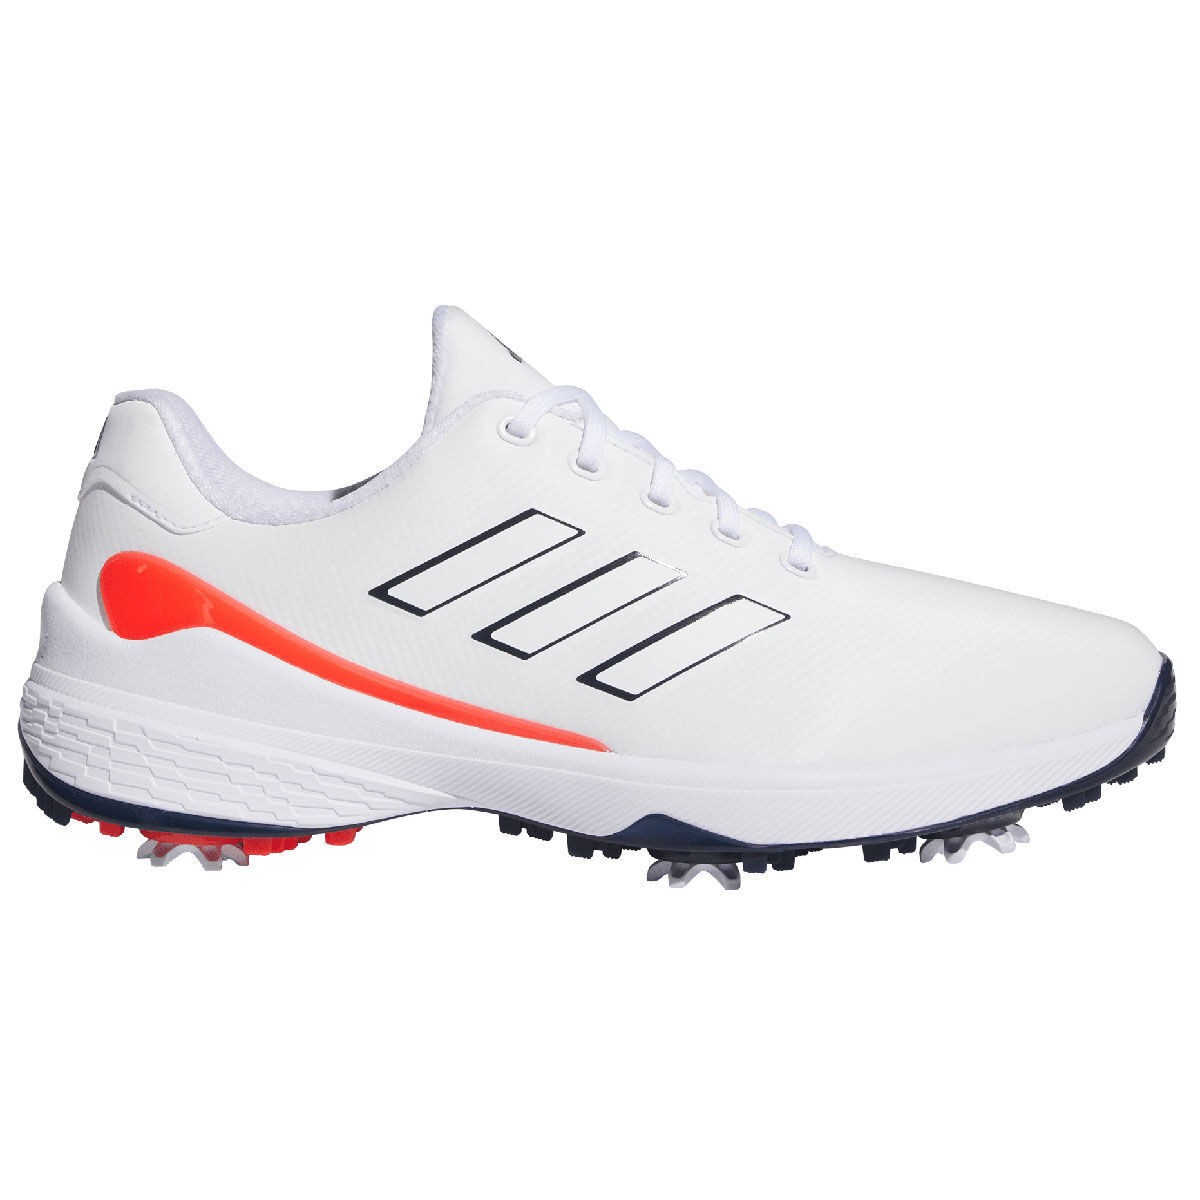 adidas Golf Men’s White, Navy Blue and Red Lightweight ZG23 Waterproof Spiked Golf Shoes, Size: 8 | American Golf